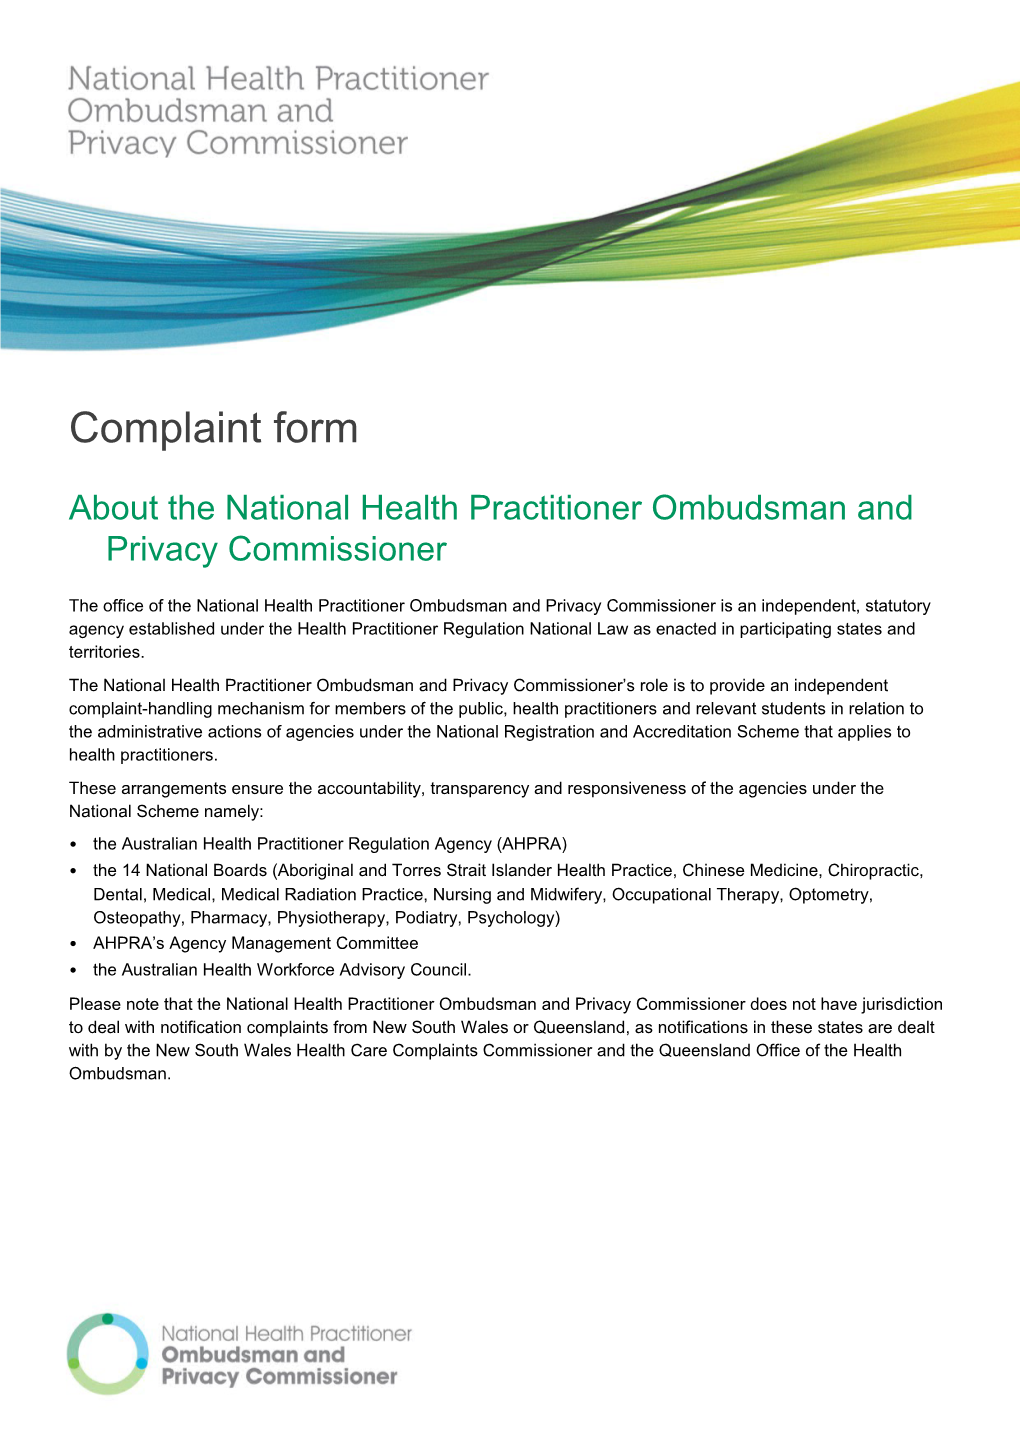 National Health Practitioner Ombudsman and Privacy Commissioner Complaint Form